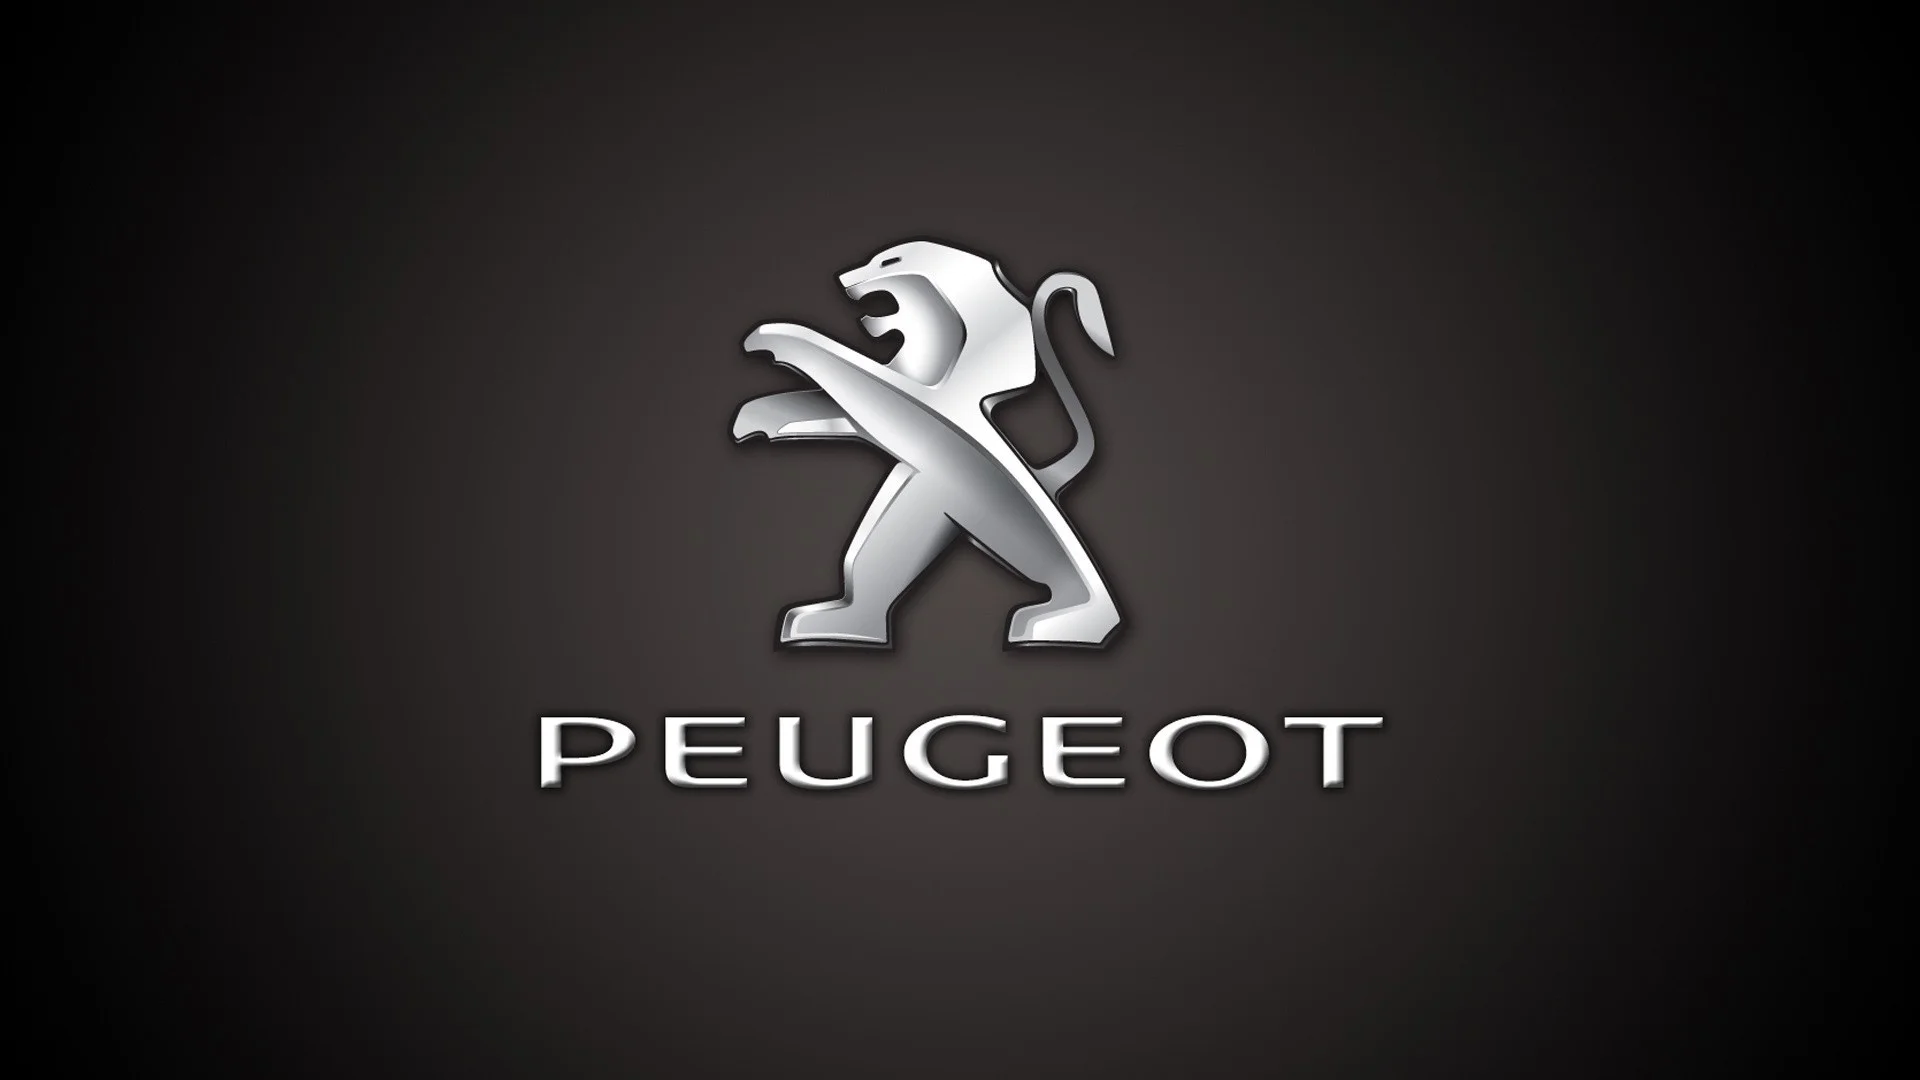 Peugeot Steel Lion Logo Wallpaper HD, we love cars which is why you will find a huge collection of free cars wallpapers in HD